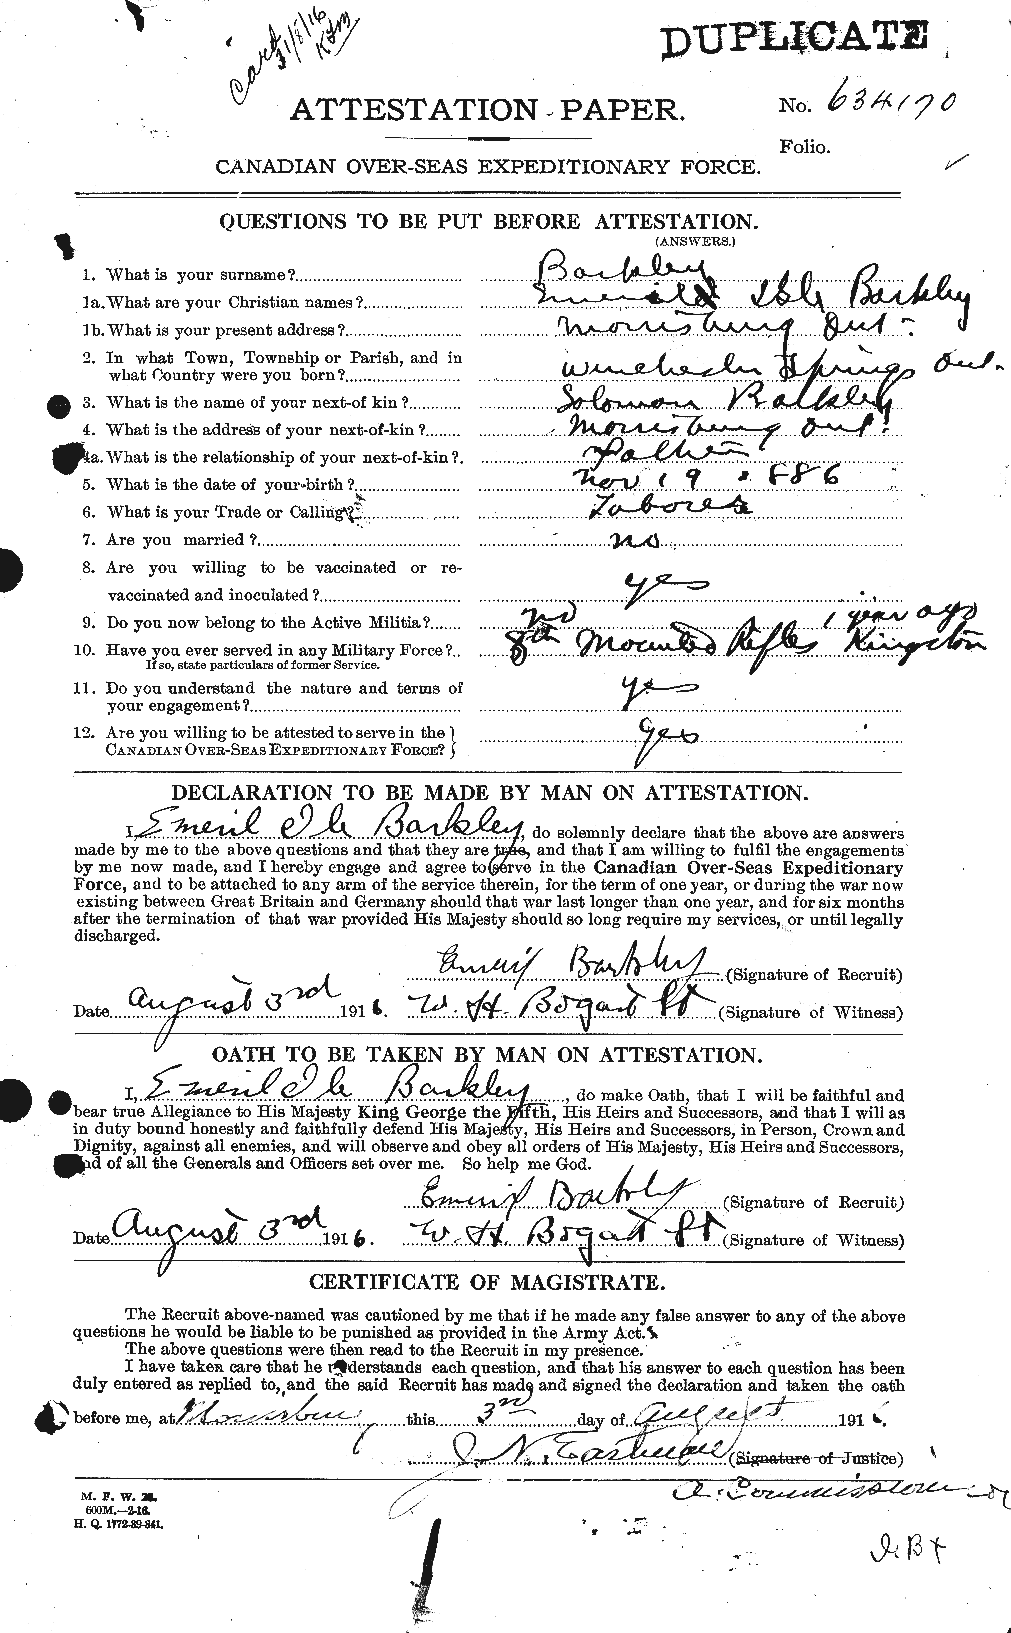 Personnel Records of the First World War - CEF 226839a